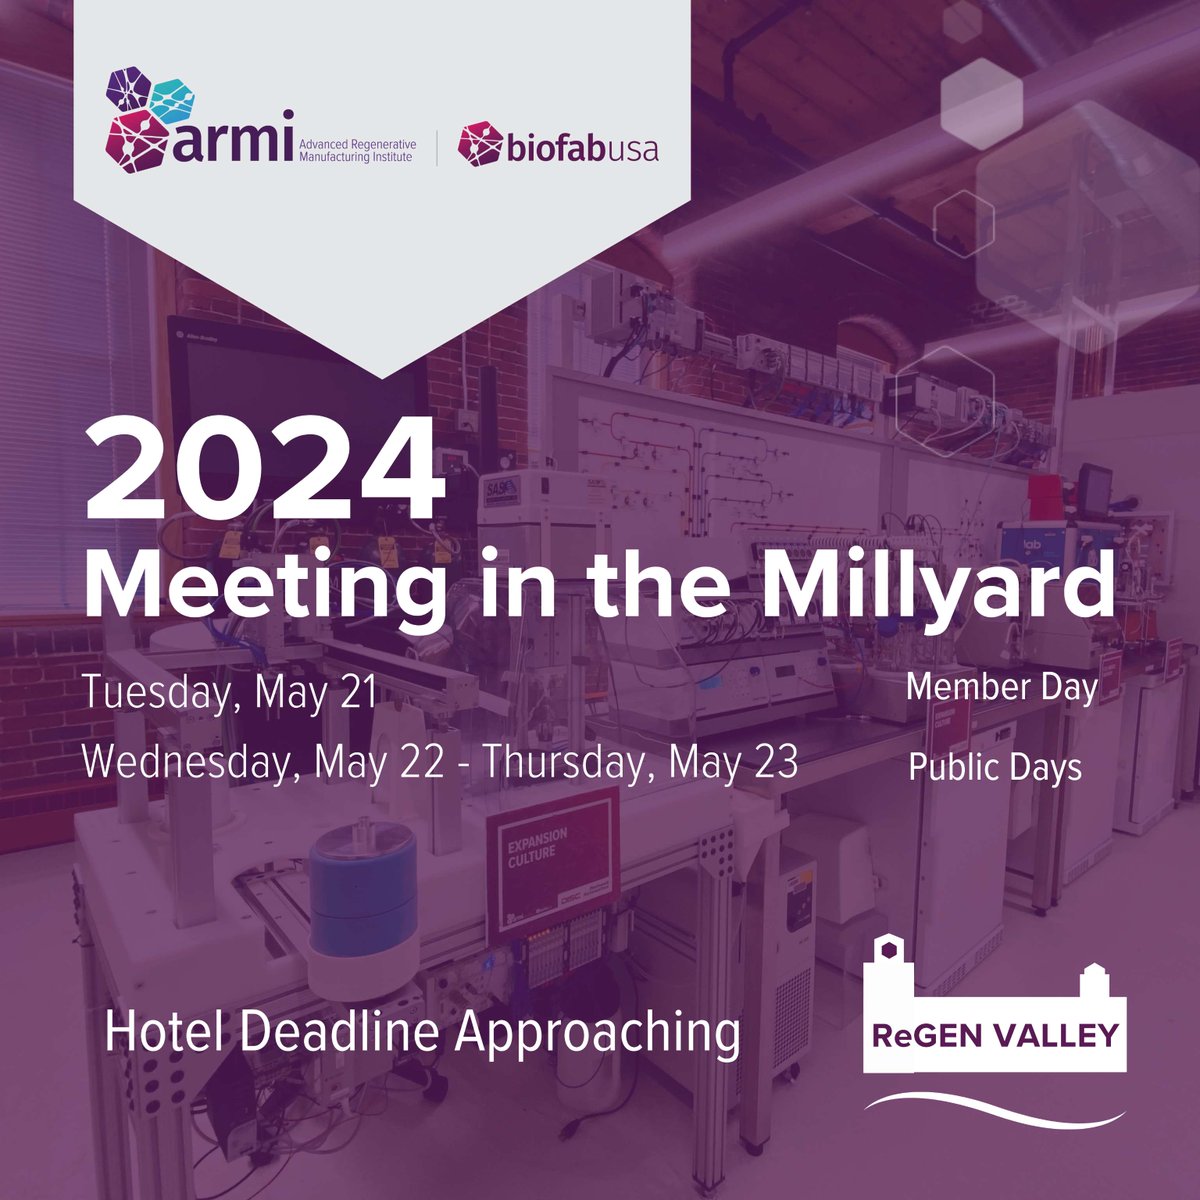 Exciting times ahead at #MITM24! Join ARMI | BioFabUSA in ReGEN VALLEY for a game-changing event shaping the future of biofabrication. Book now before the hotel deadline! #Biofabrication #Innovation ow.ly/fX3z50QPJOR